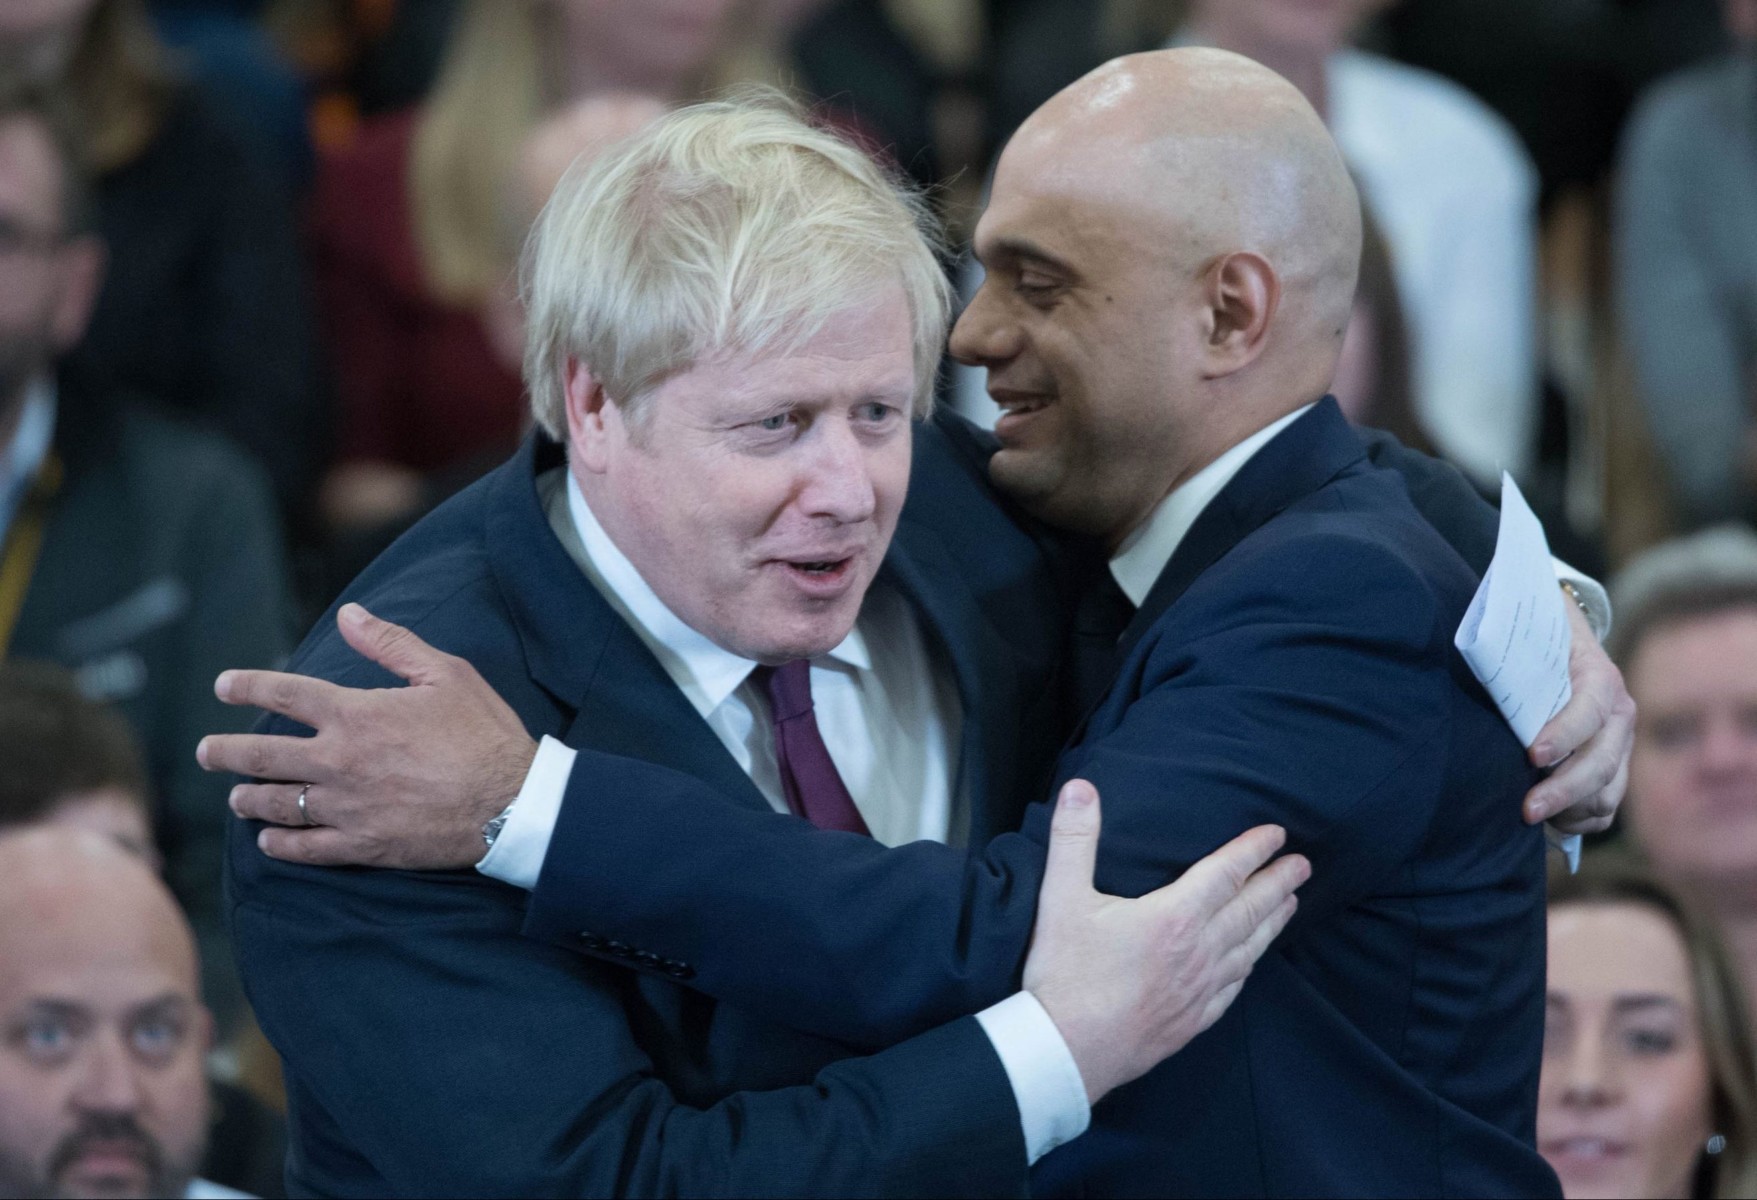 Even Boris Johnson was sorry to see his ally Sajid Javid going